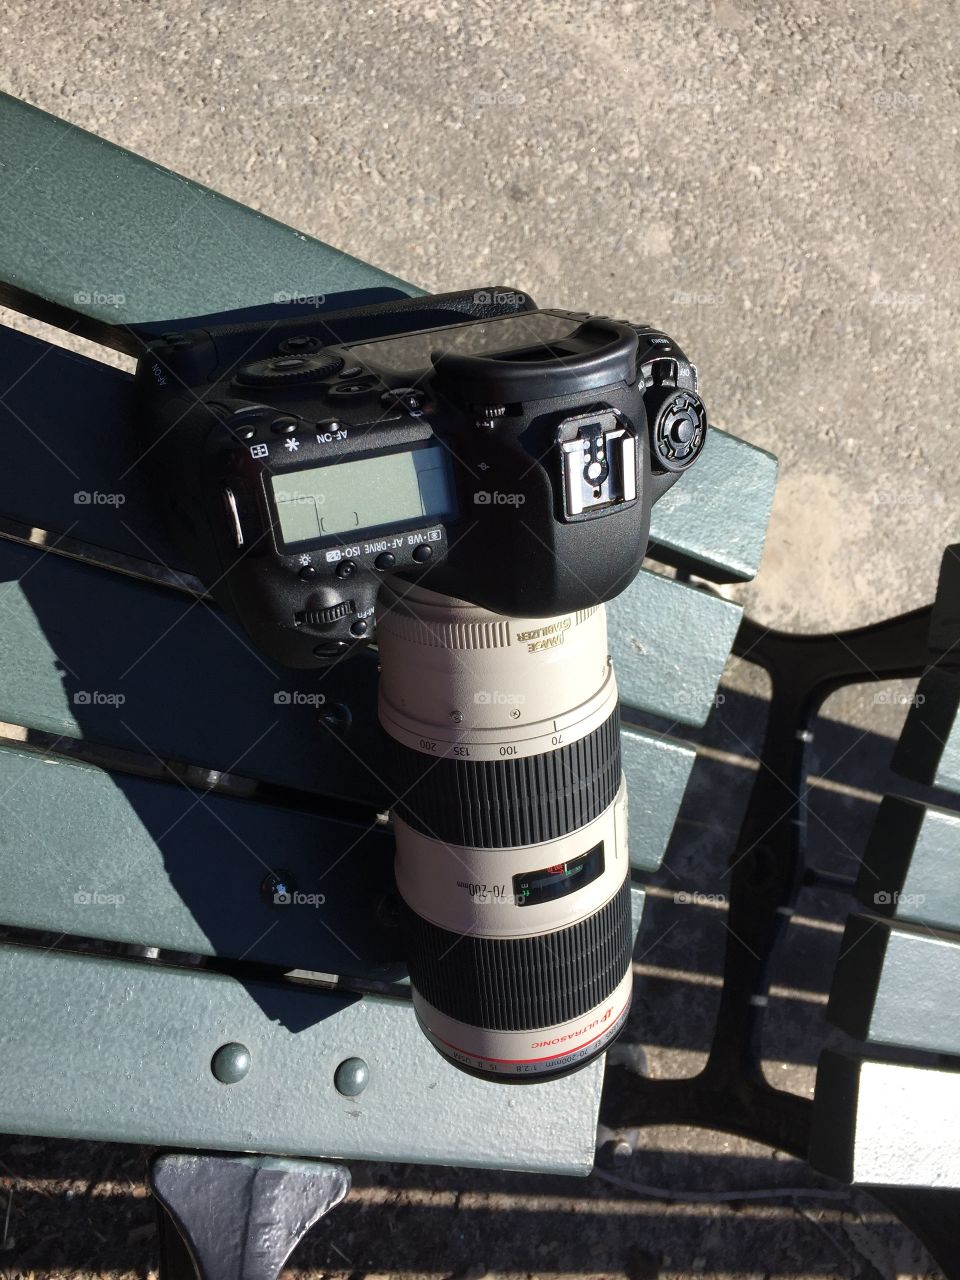 
Canon camera 5D Mark III with a Canon 70-200mm f2.8 II